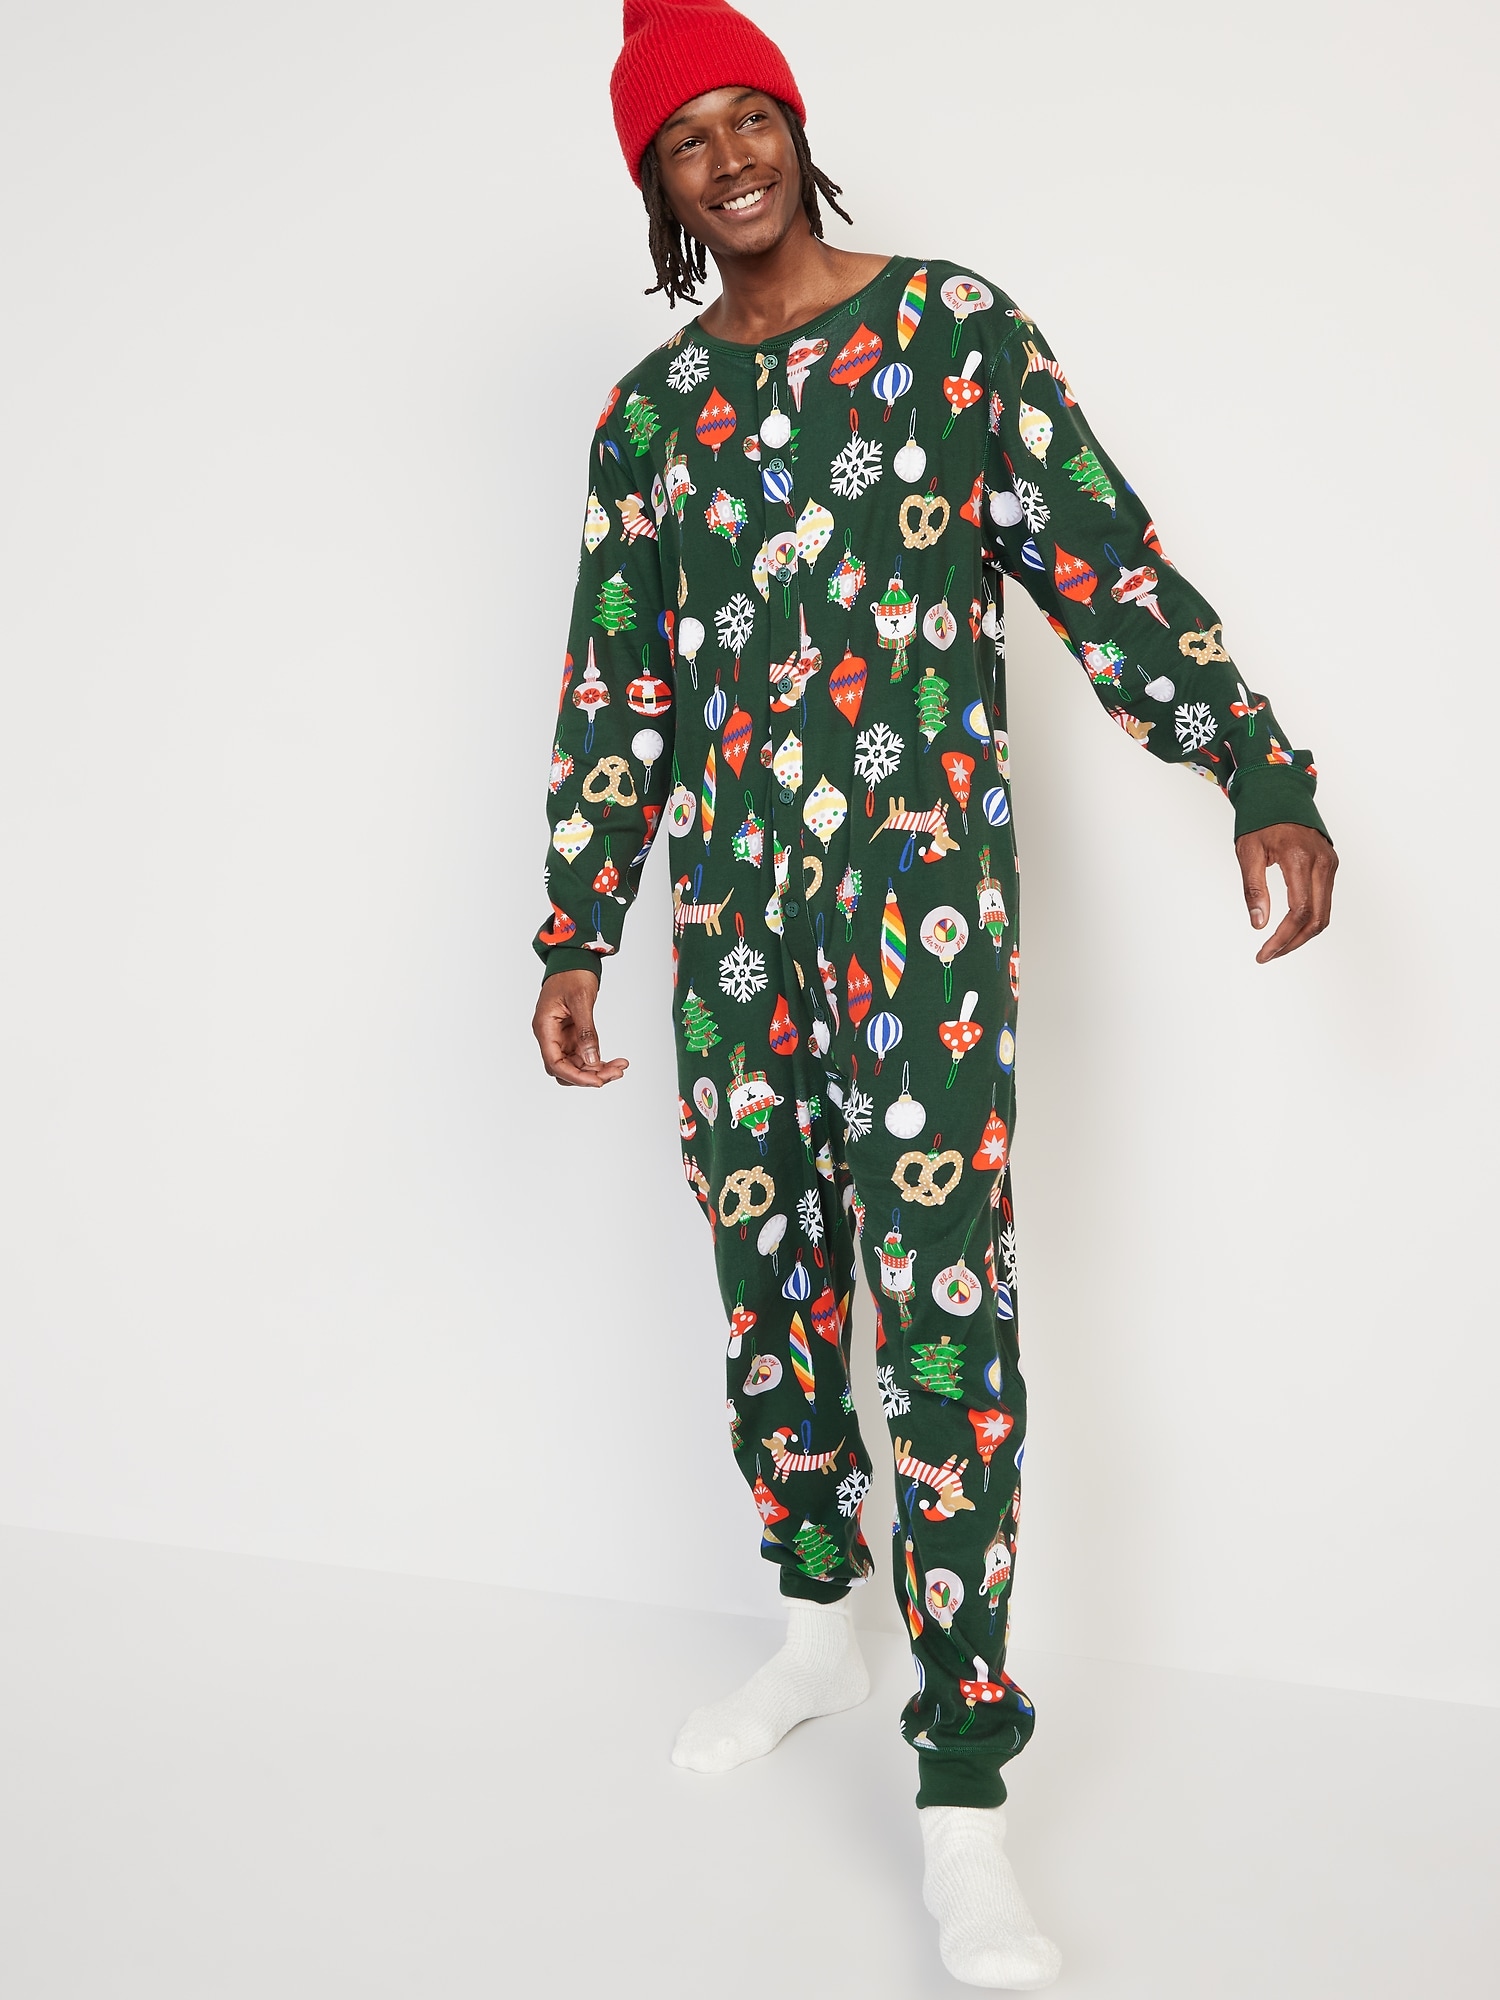 Old Navy Matching Christmas Print One-Piece Pajamas for Men green. 1